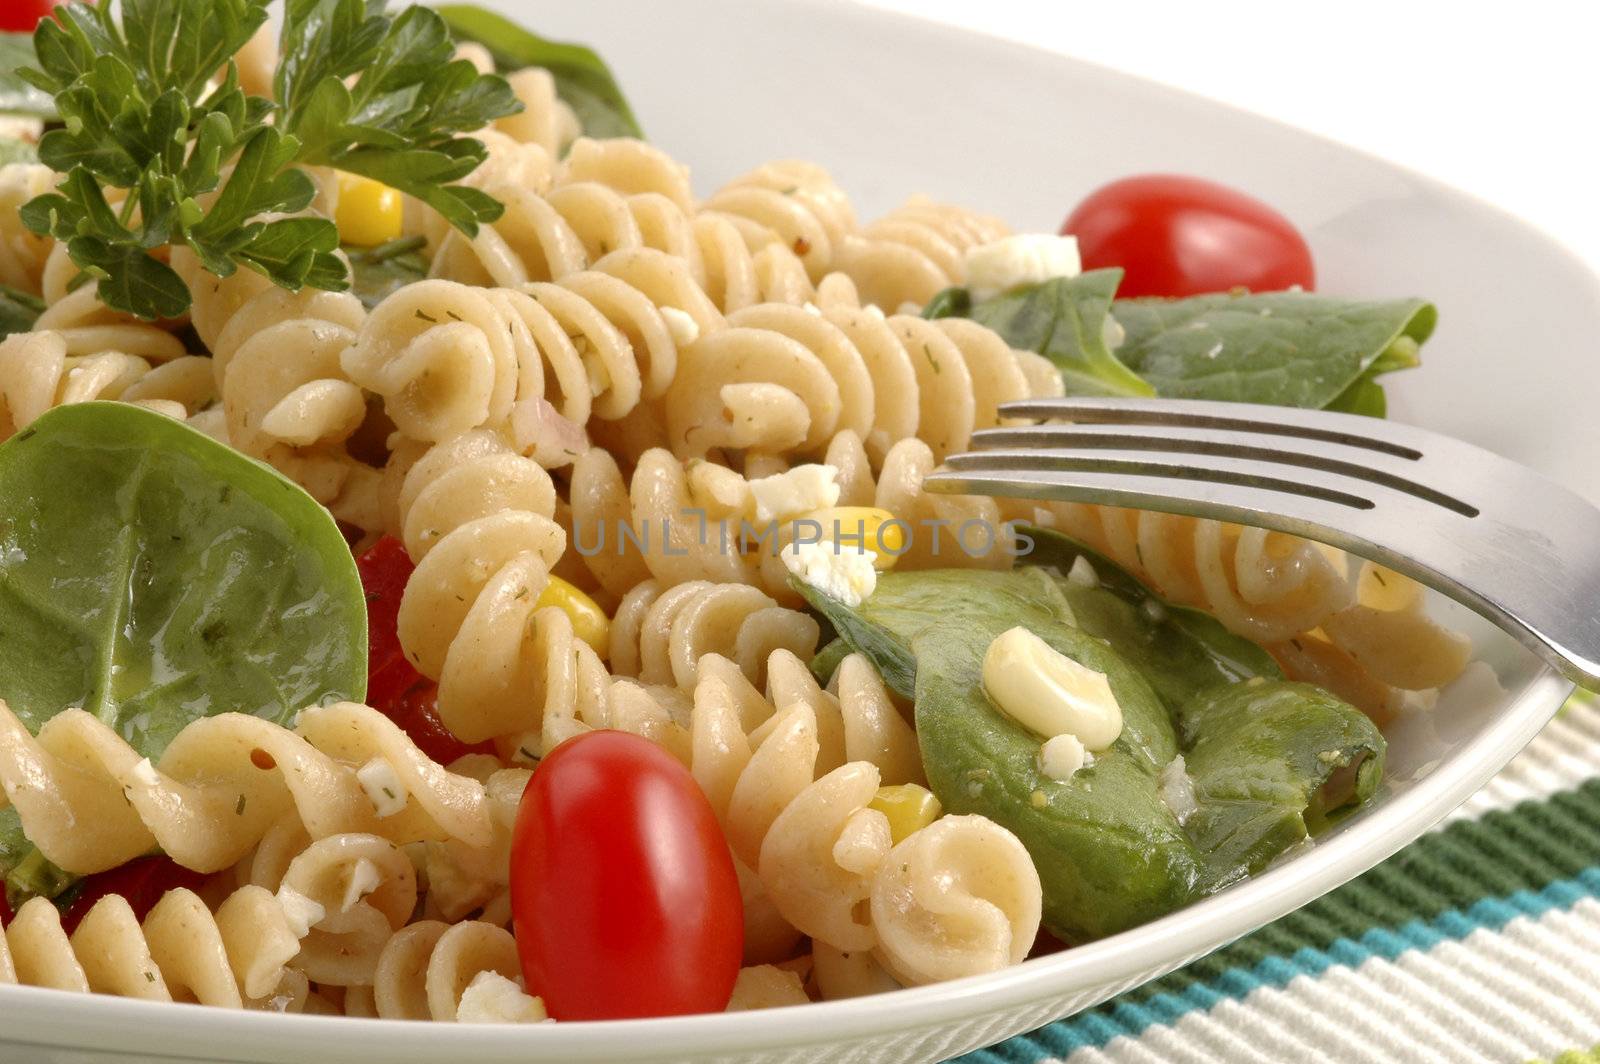 Pasta Salad by billberryphotography